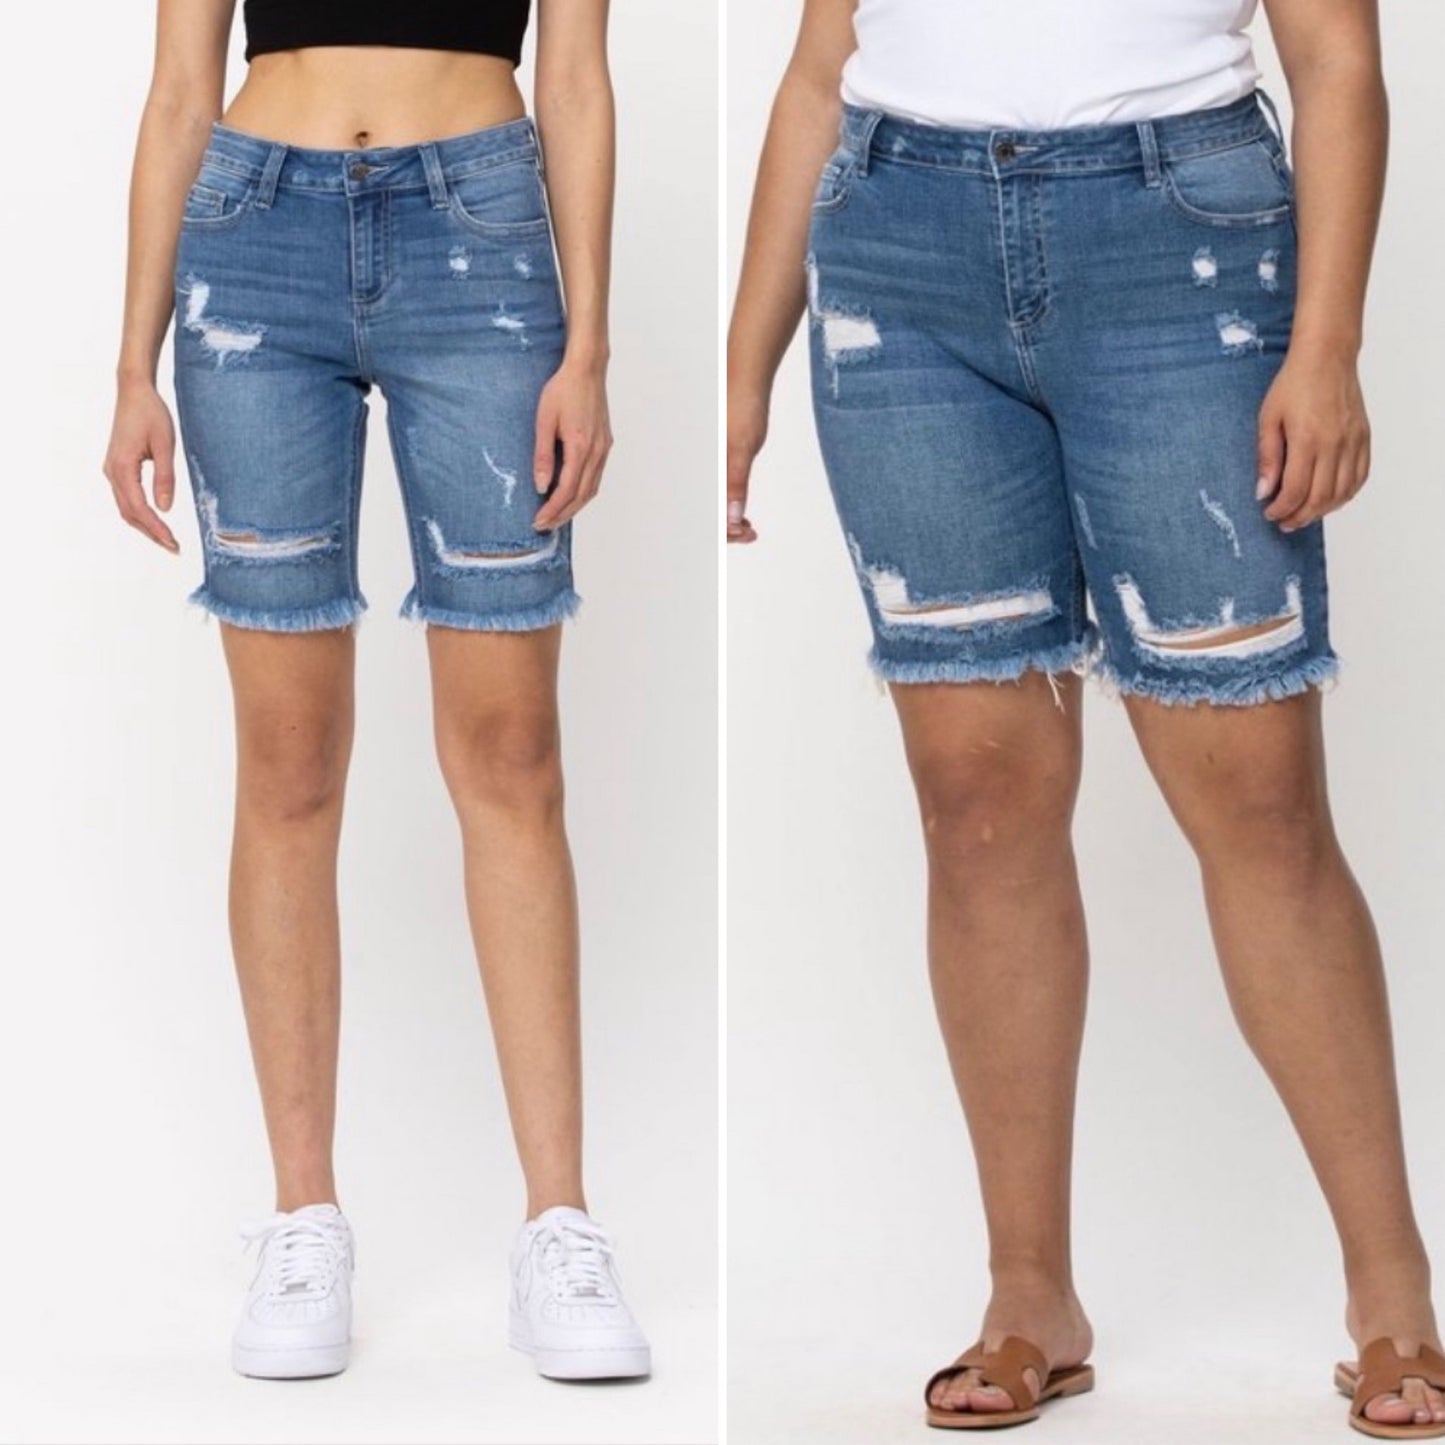 Mid Rise Distressed Shorts